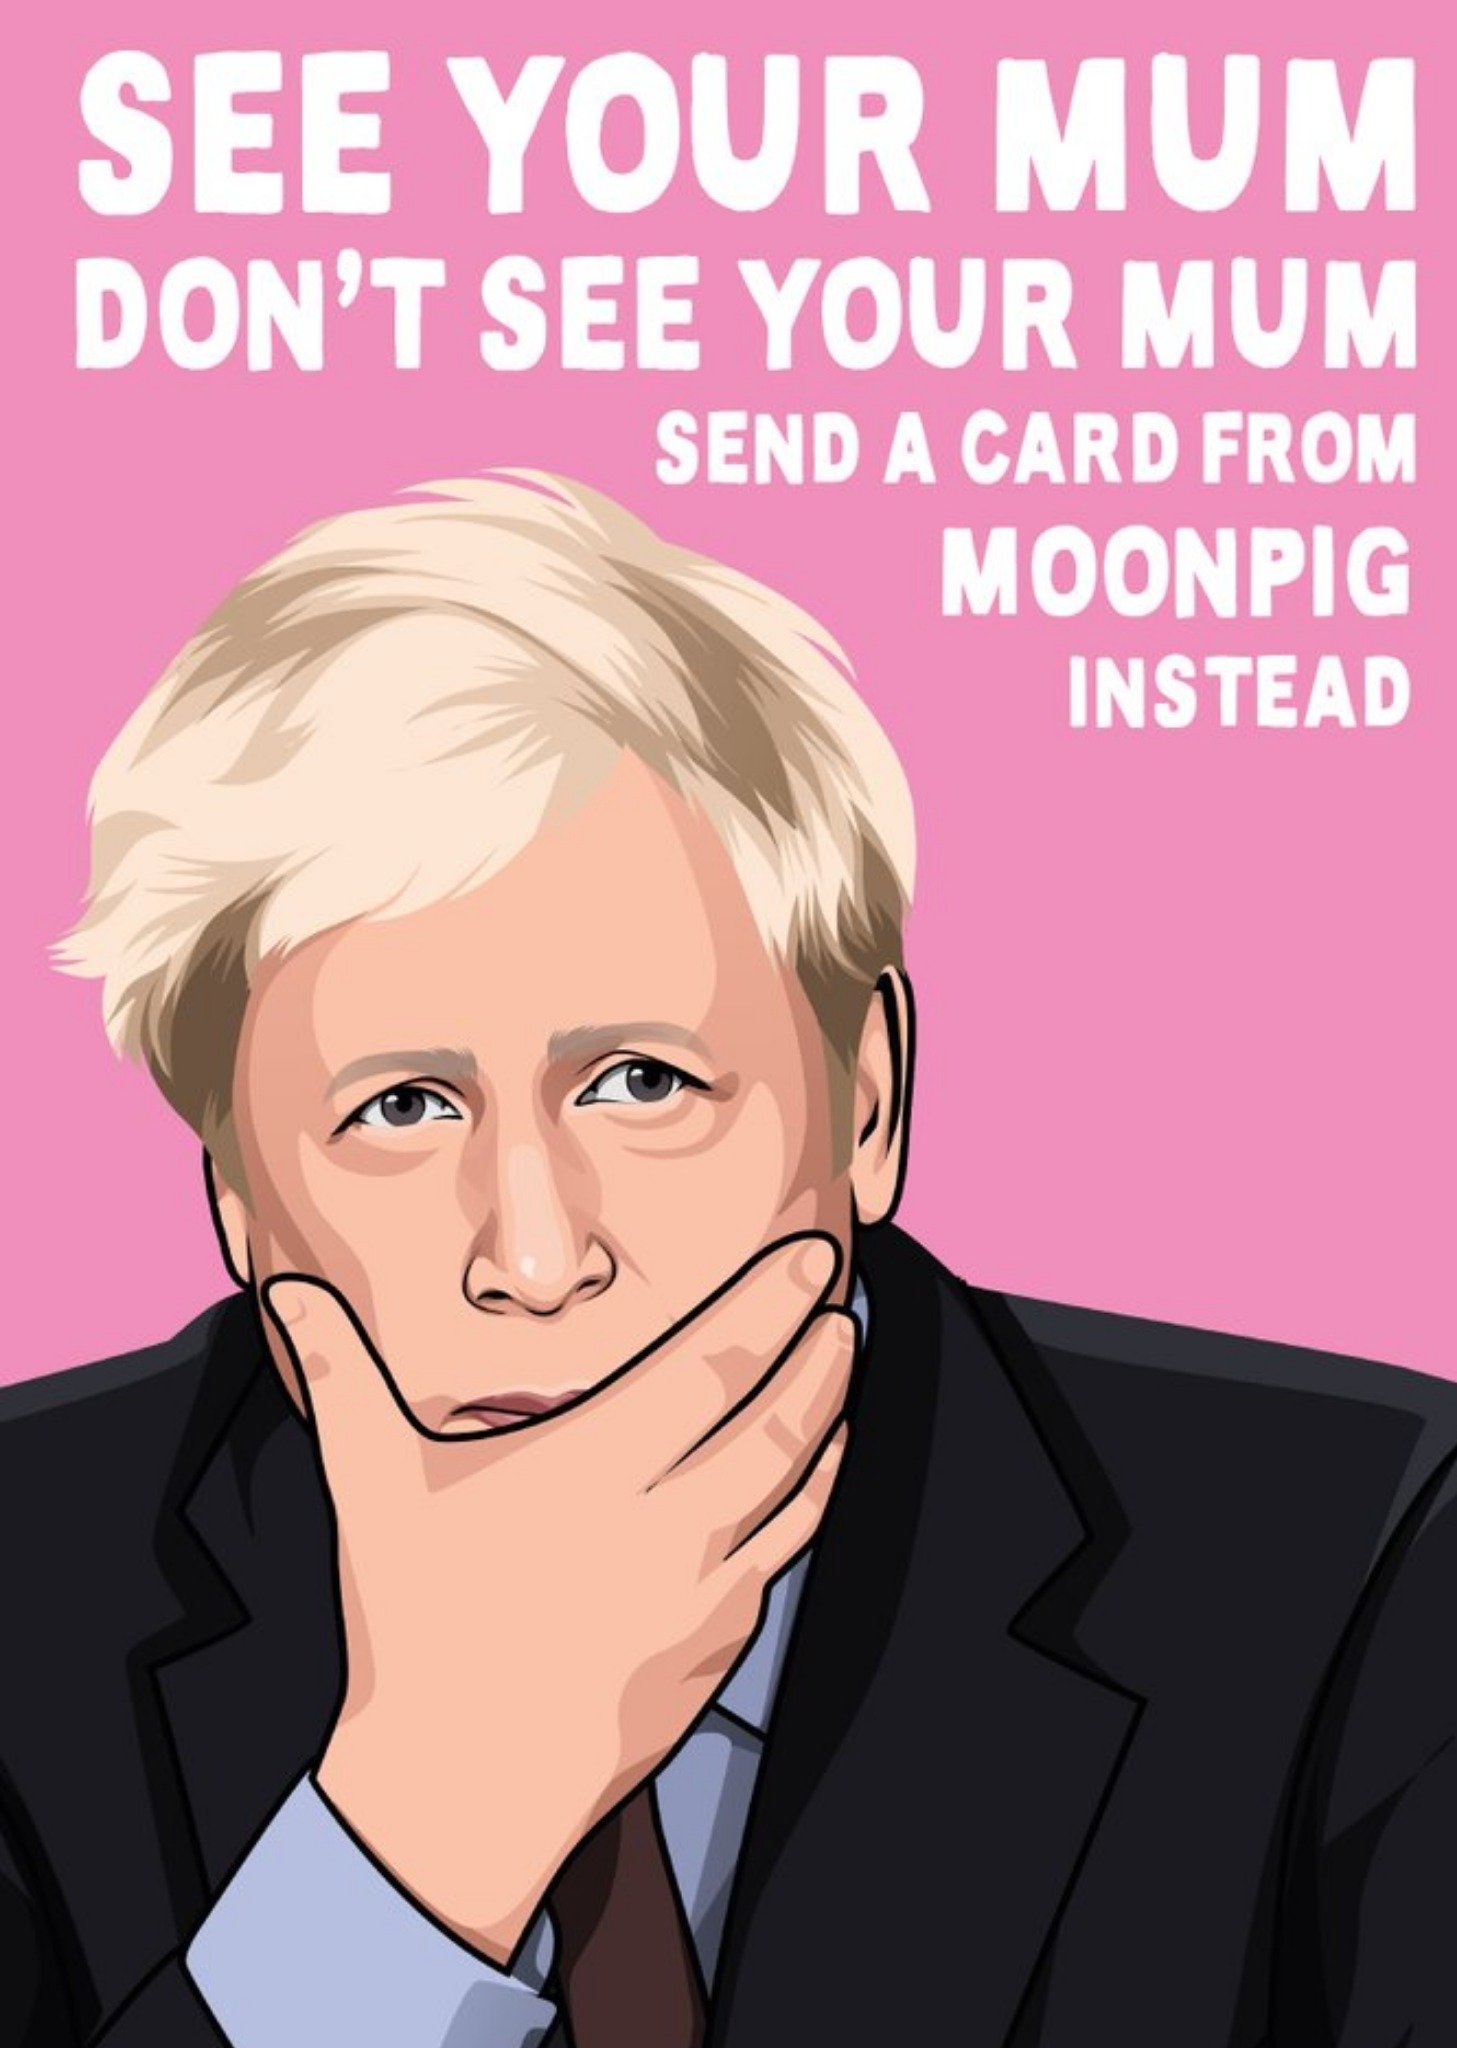 All Things Banter Covid Funny Send A Card From Moonpig Instead Card Ecard